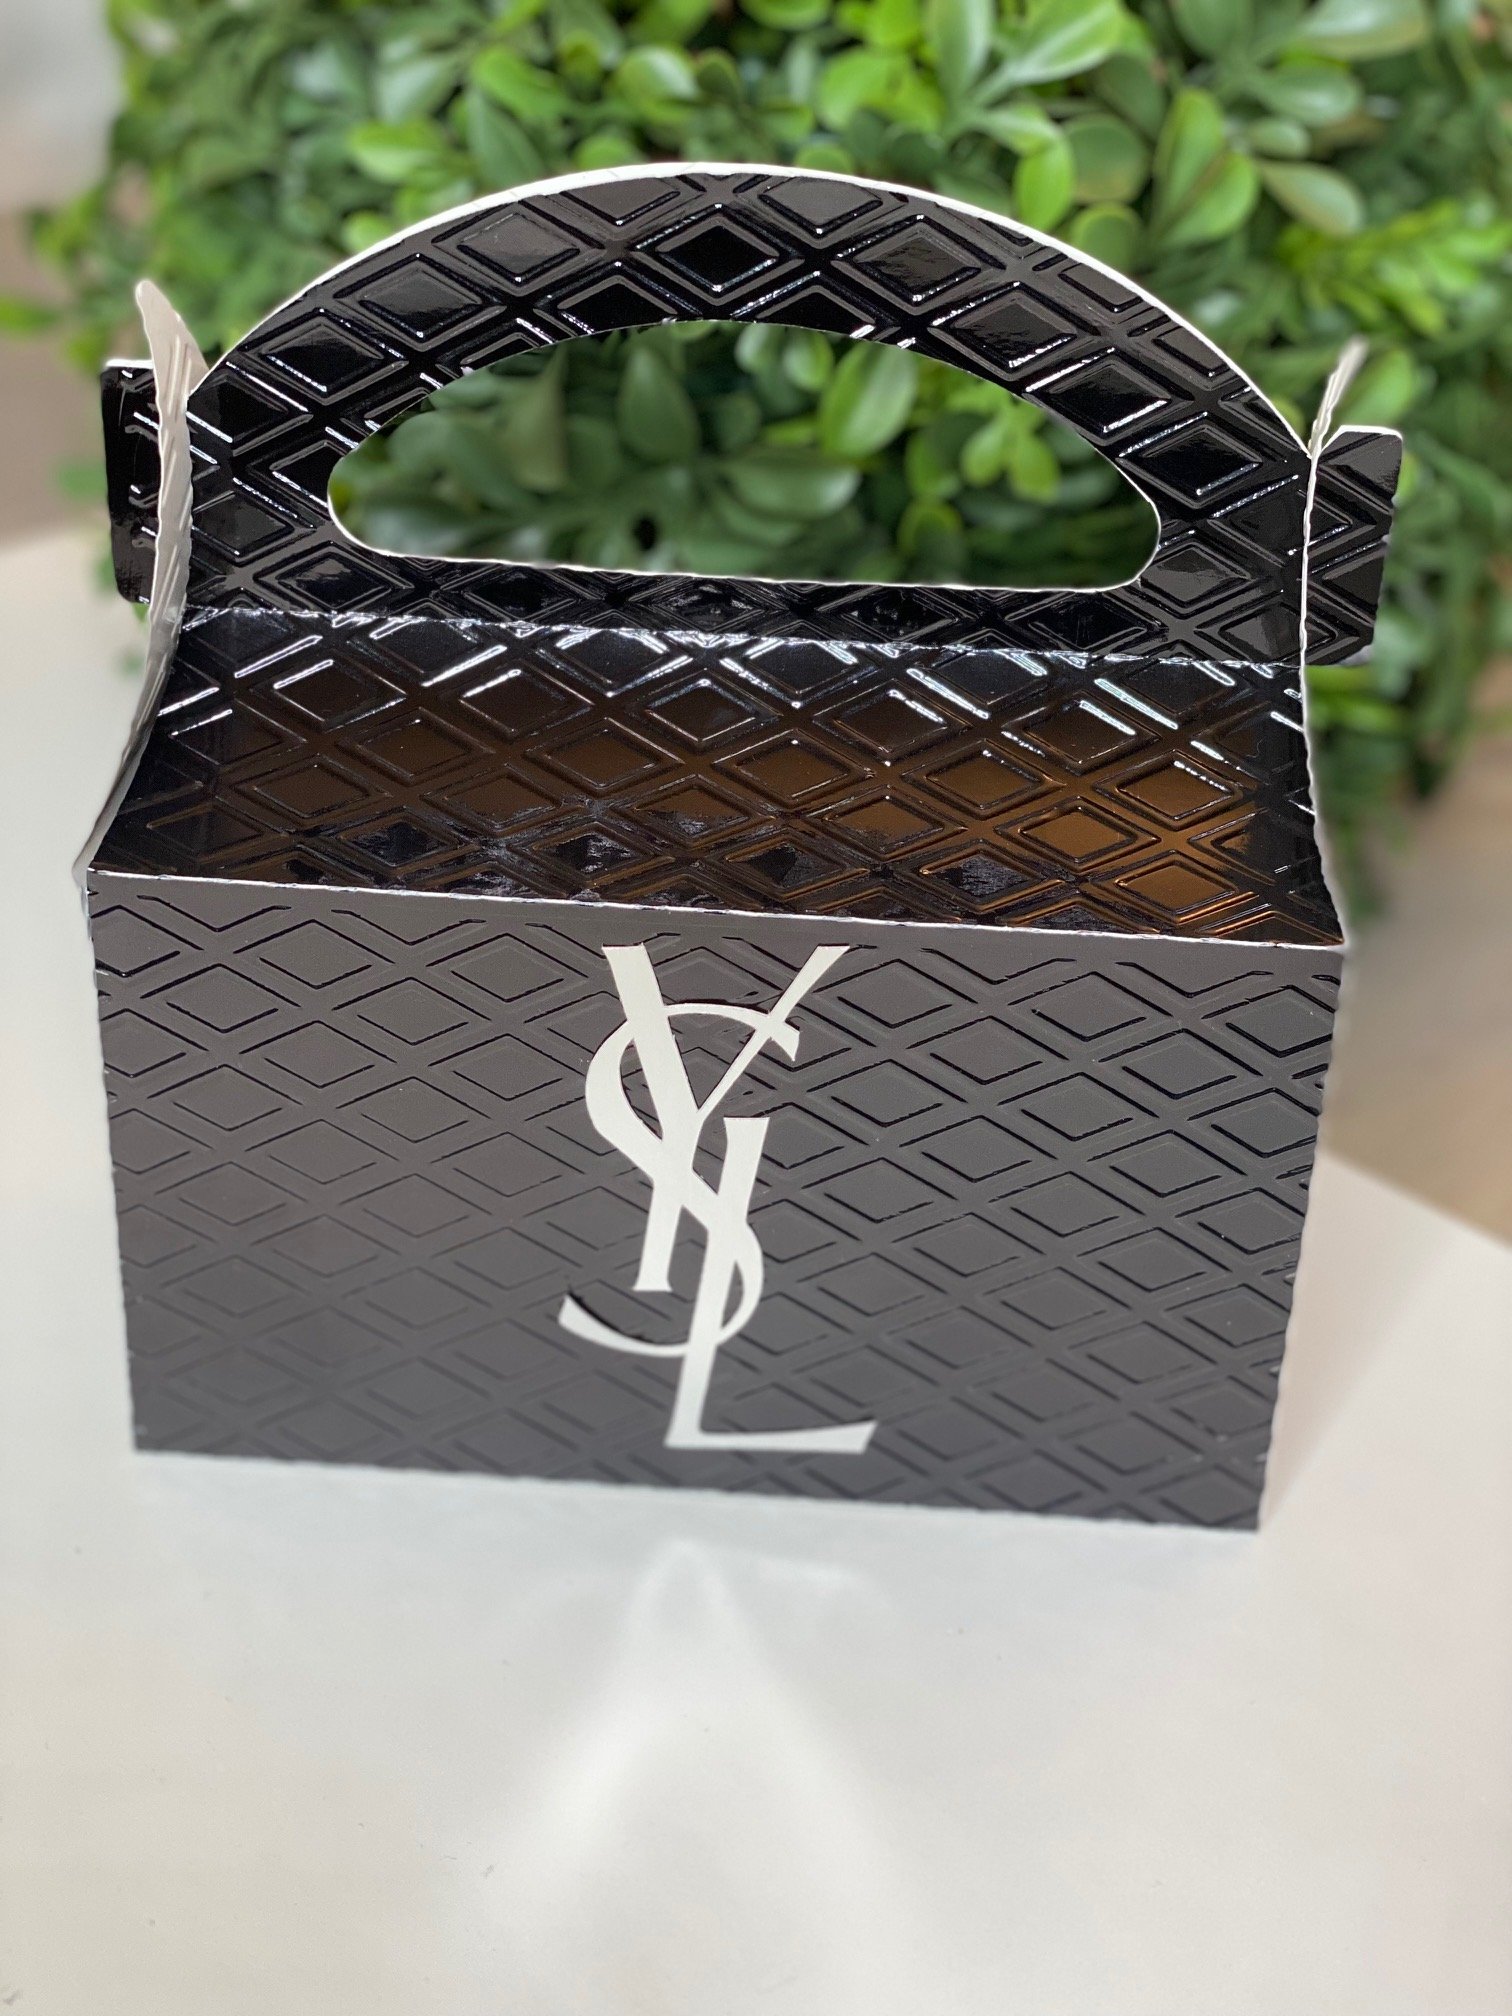 YSl , SAINT LAURENT LUNCH BOX TOTE FAVORS — Luxury Party Items